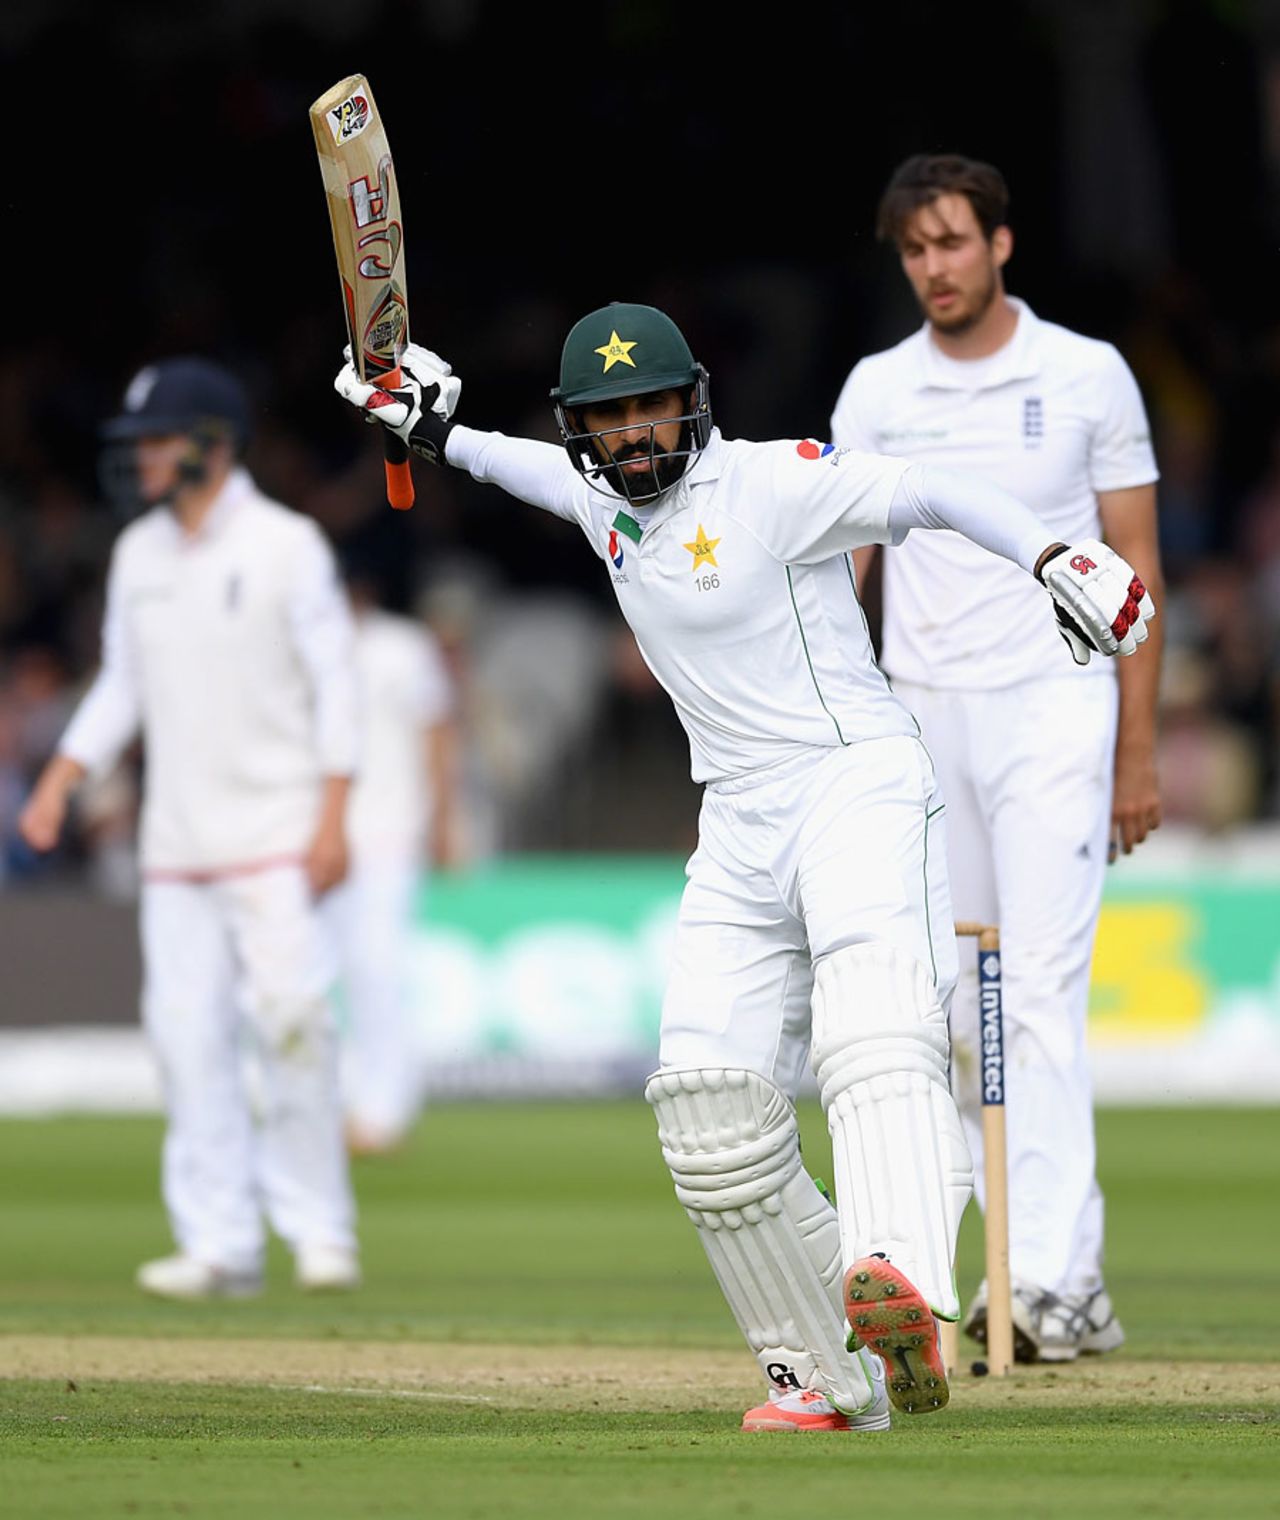 Misbah-ul-Haq celebrates a hundred on his first appearance at Lord's, England v Pakistan, 1st Investec Test, Lord's, 1st day, July 14, 2016